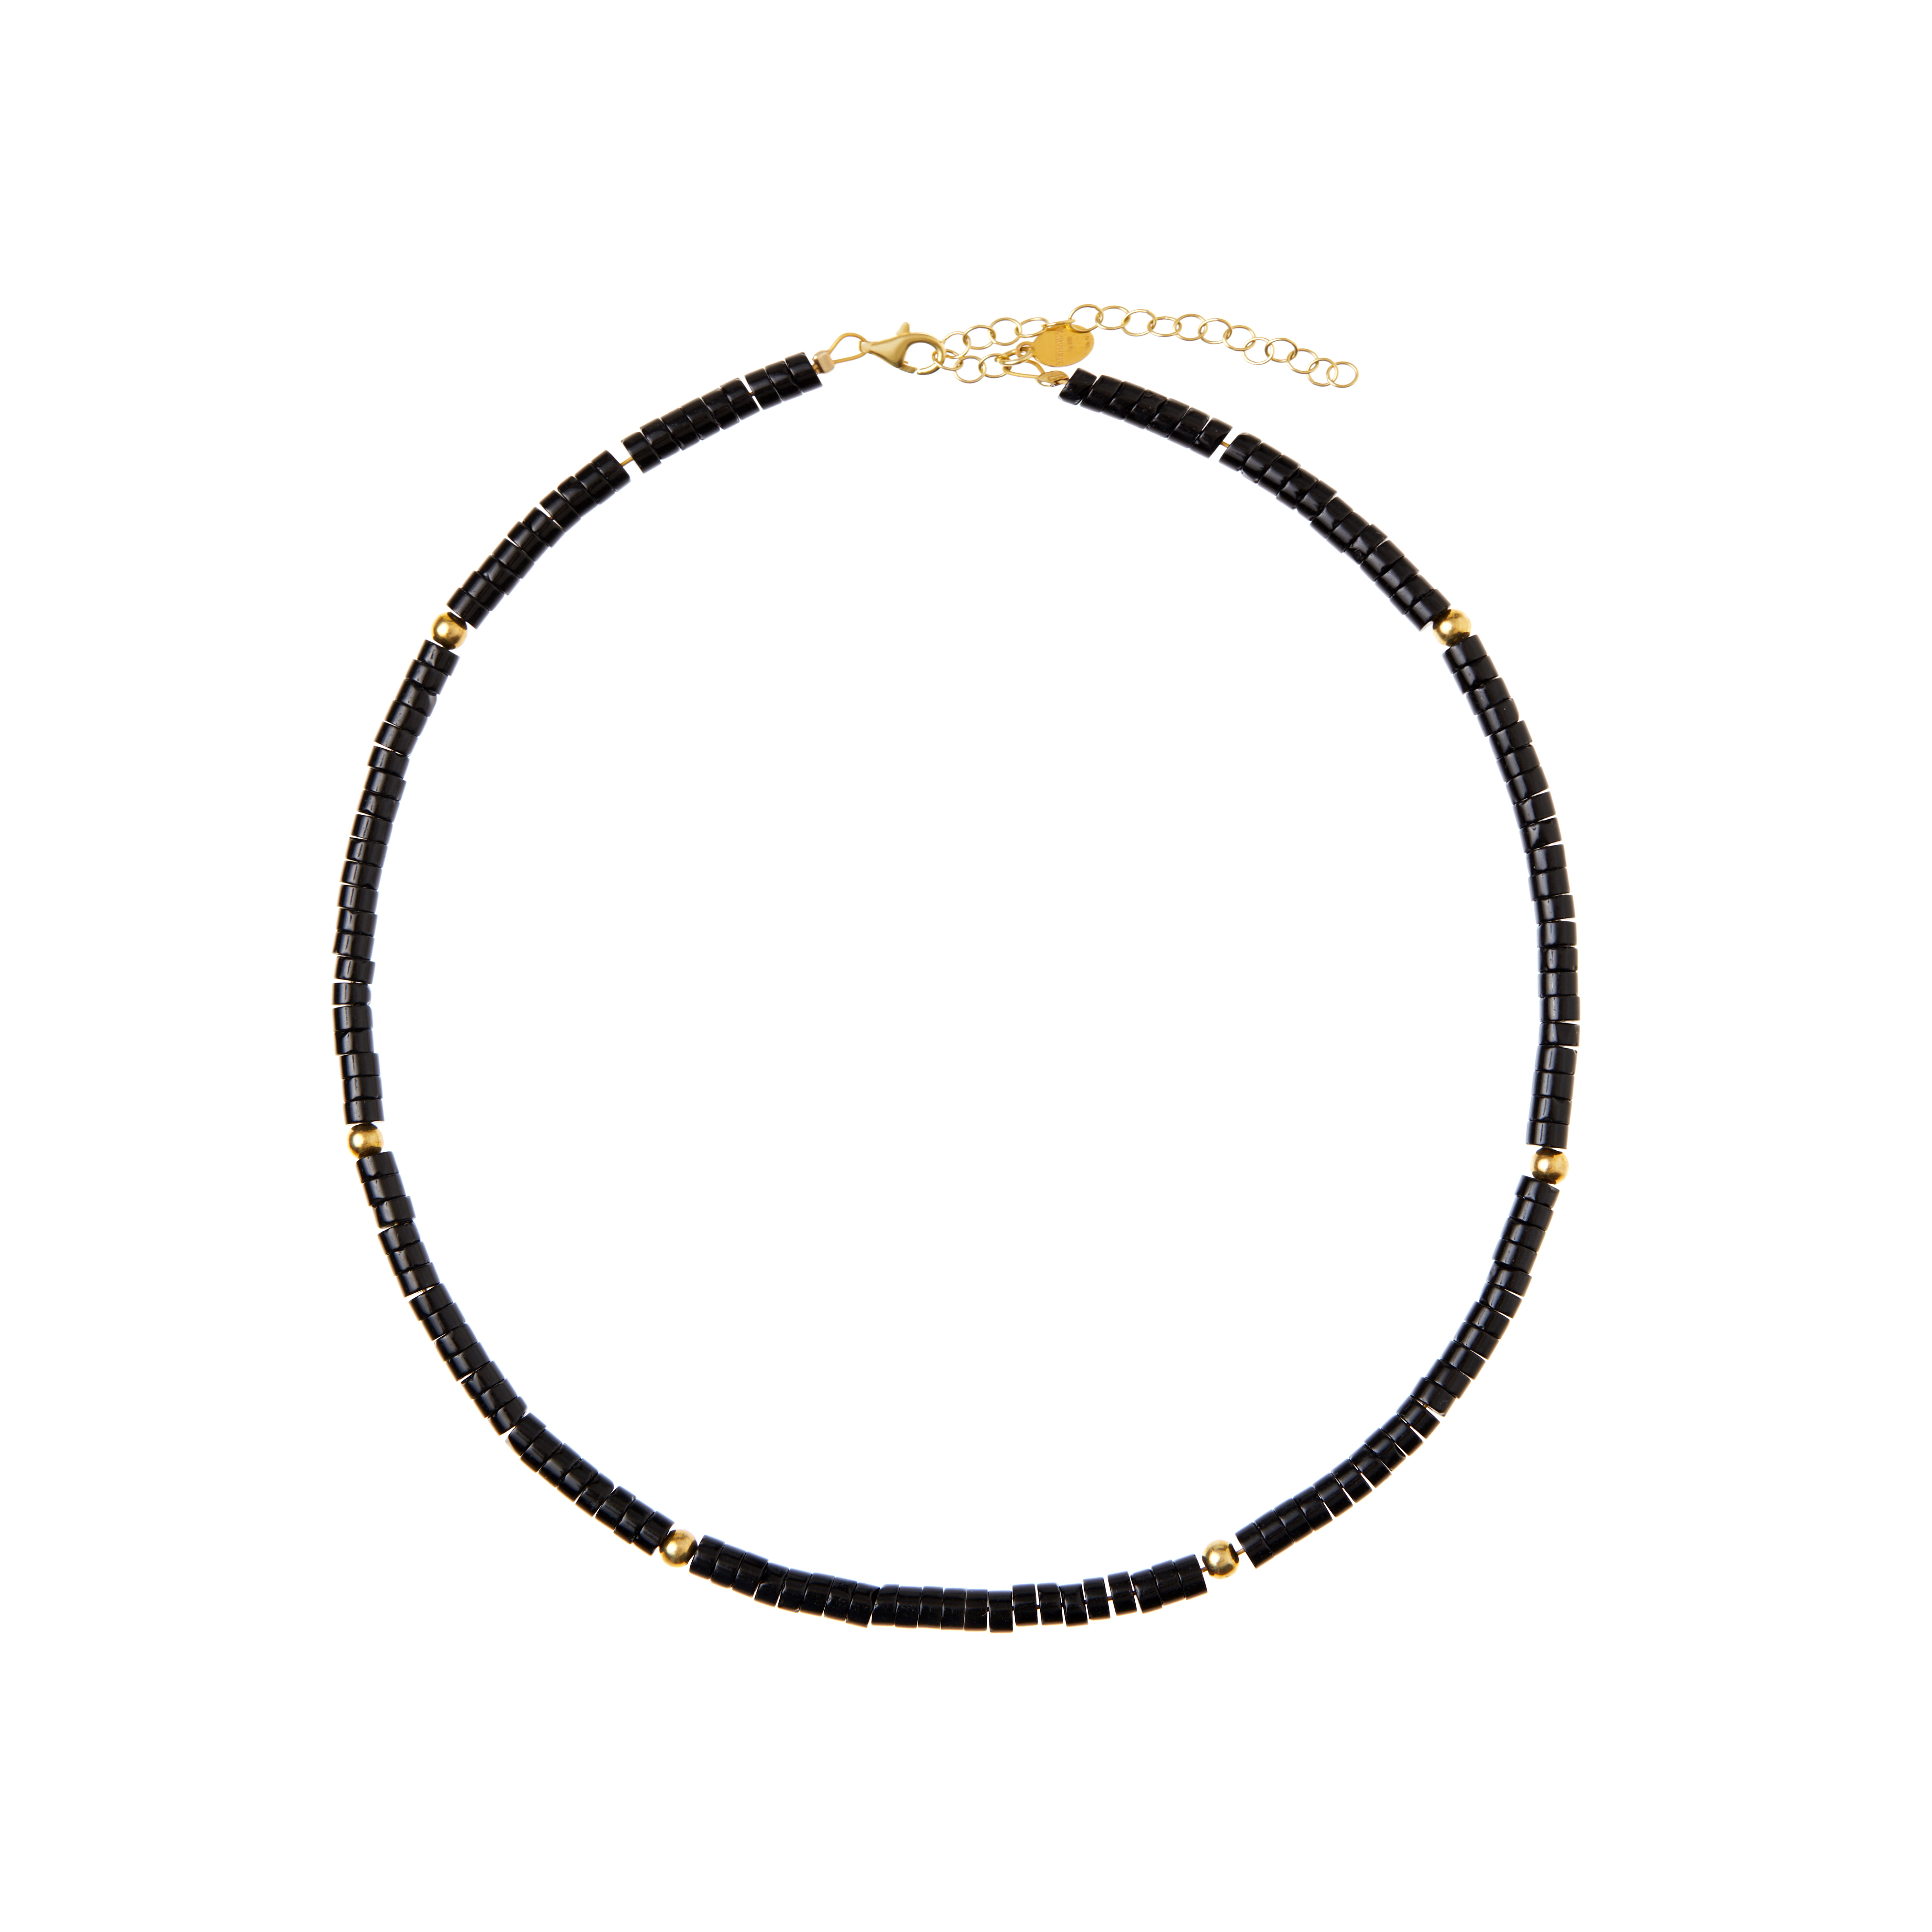 HERMINA ATHENS Колье Holly Golightly Necklace hermina athens колье theodora woven chain necklace